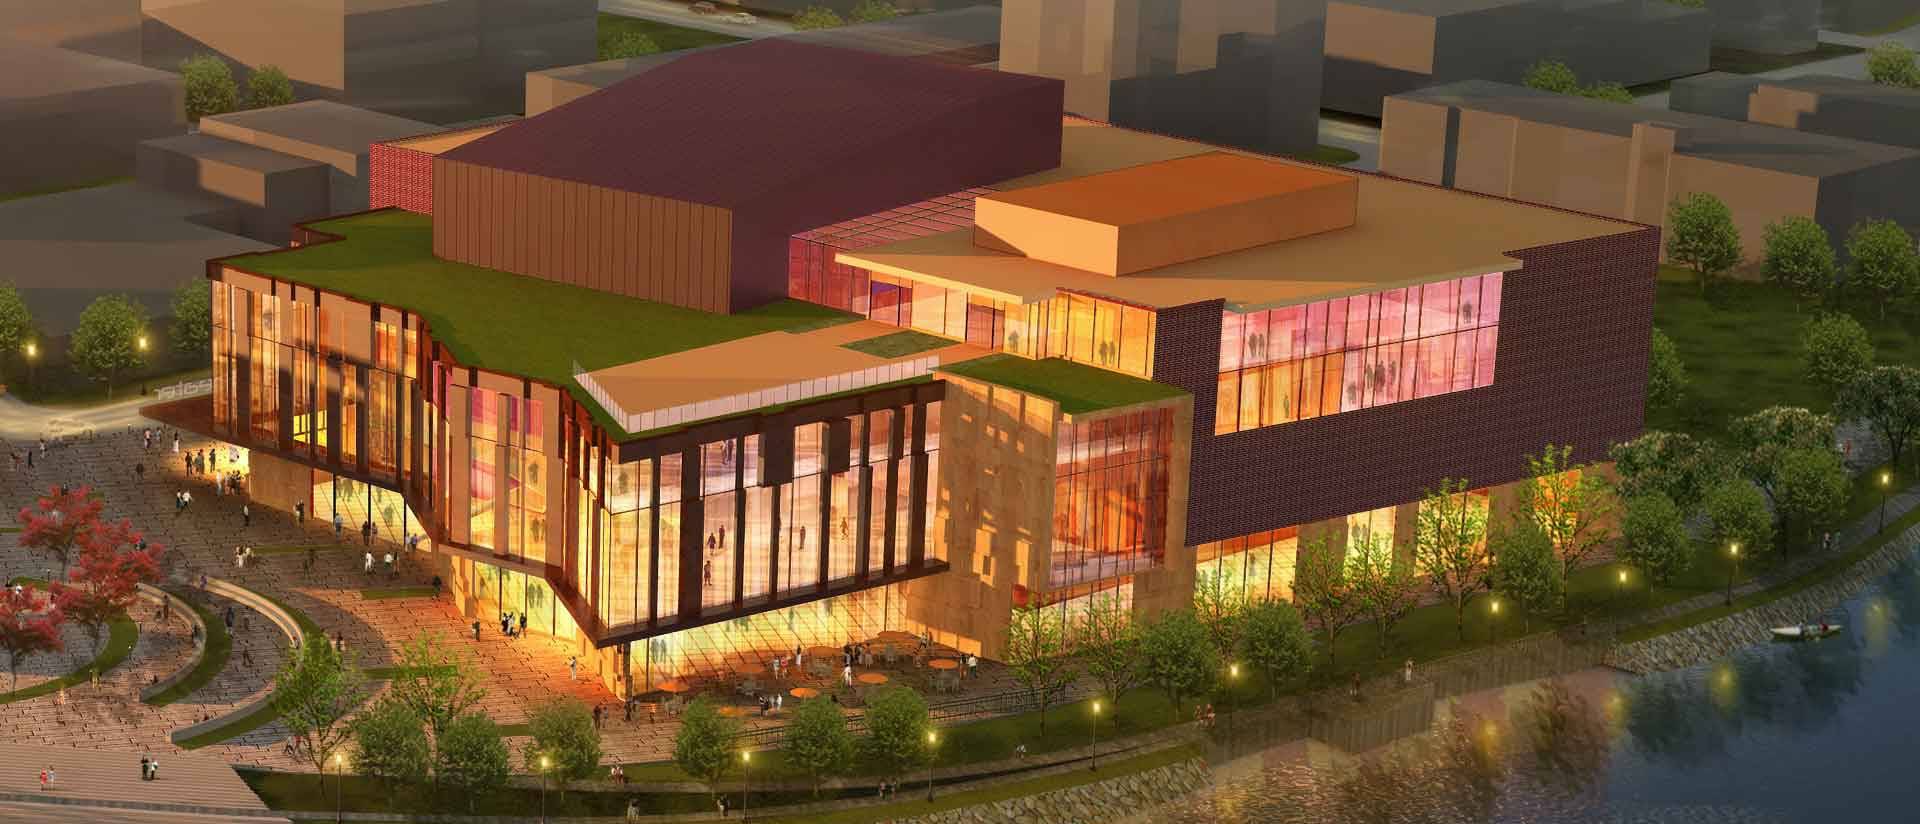 Initial artist's rendering of Confluence Arts Center